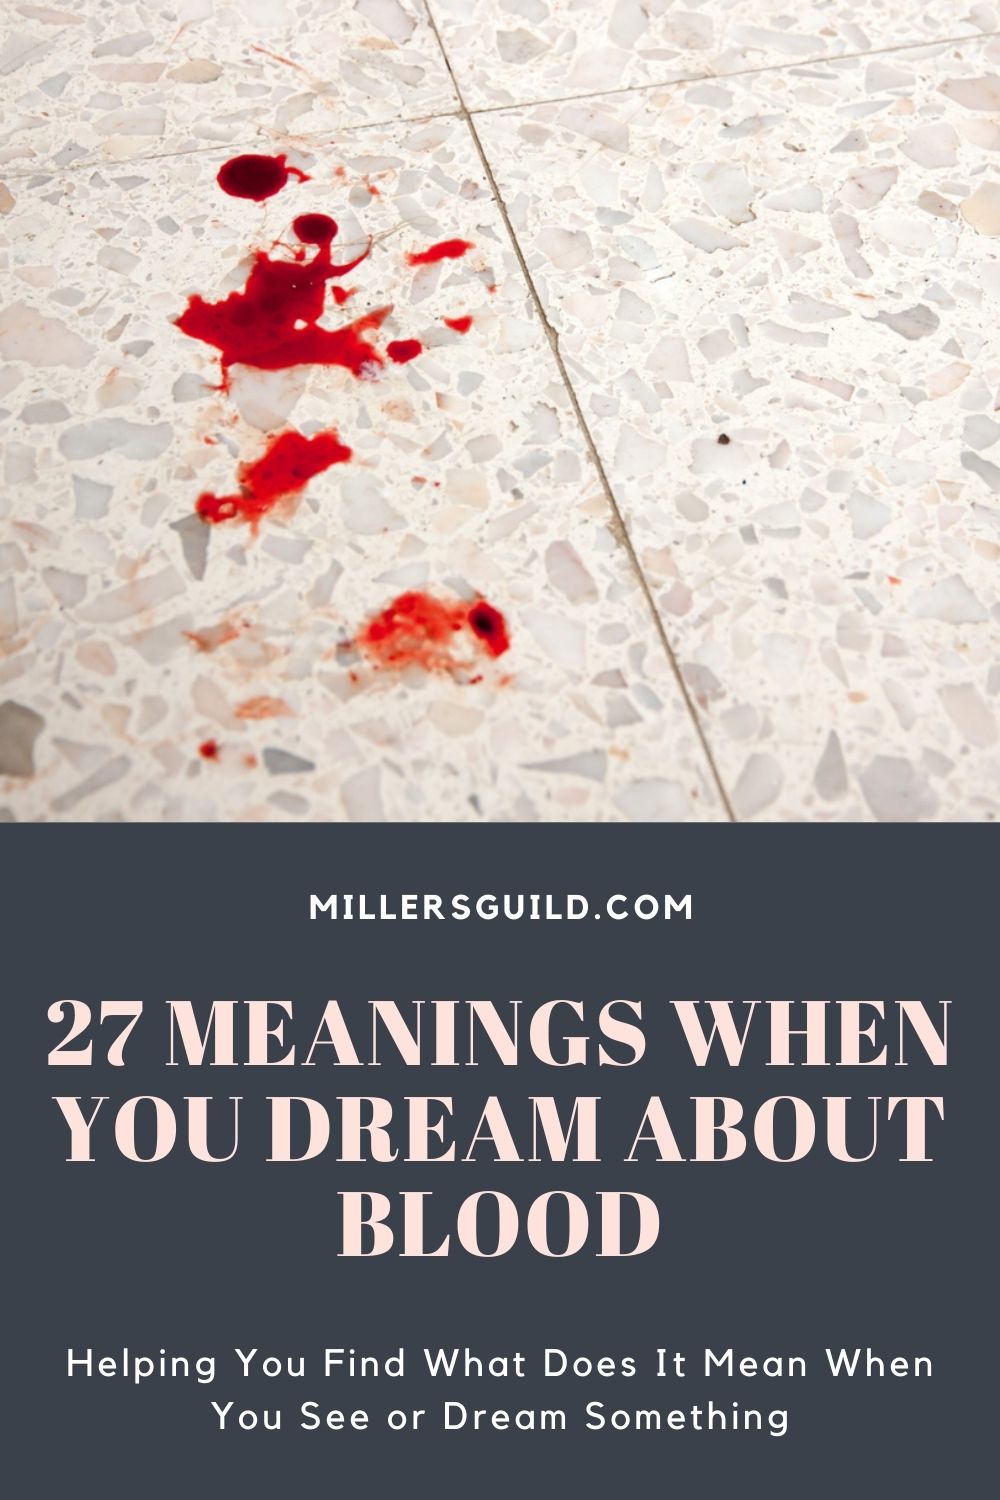 Dream Of Spitting Blood And Finances